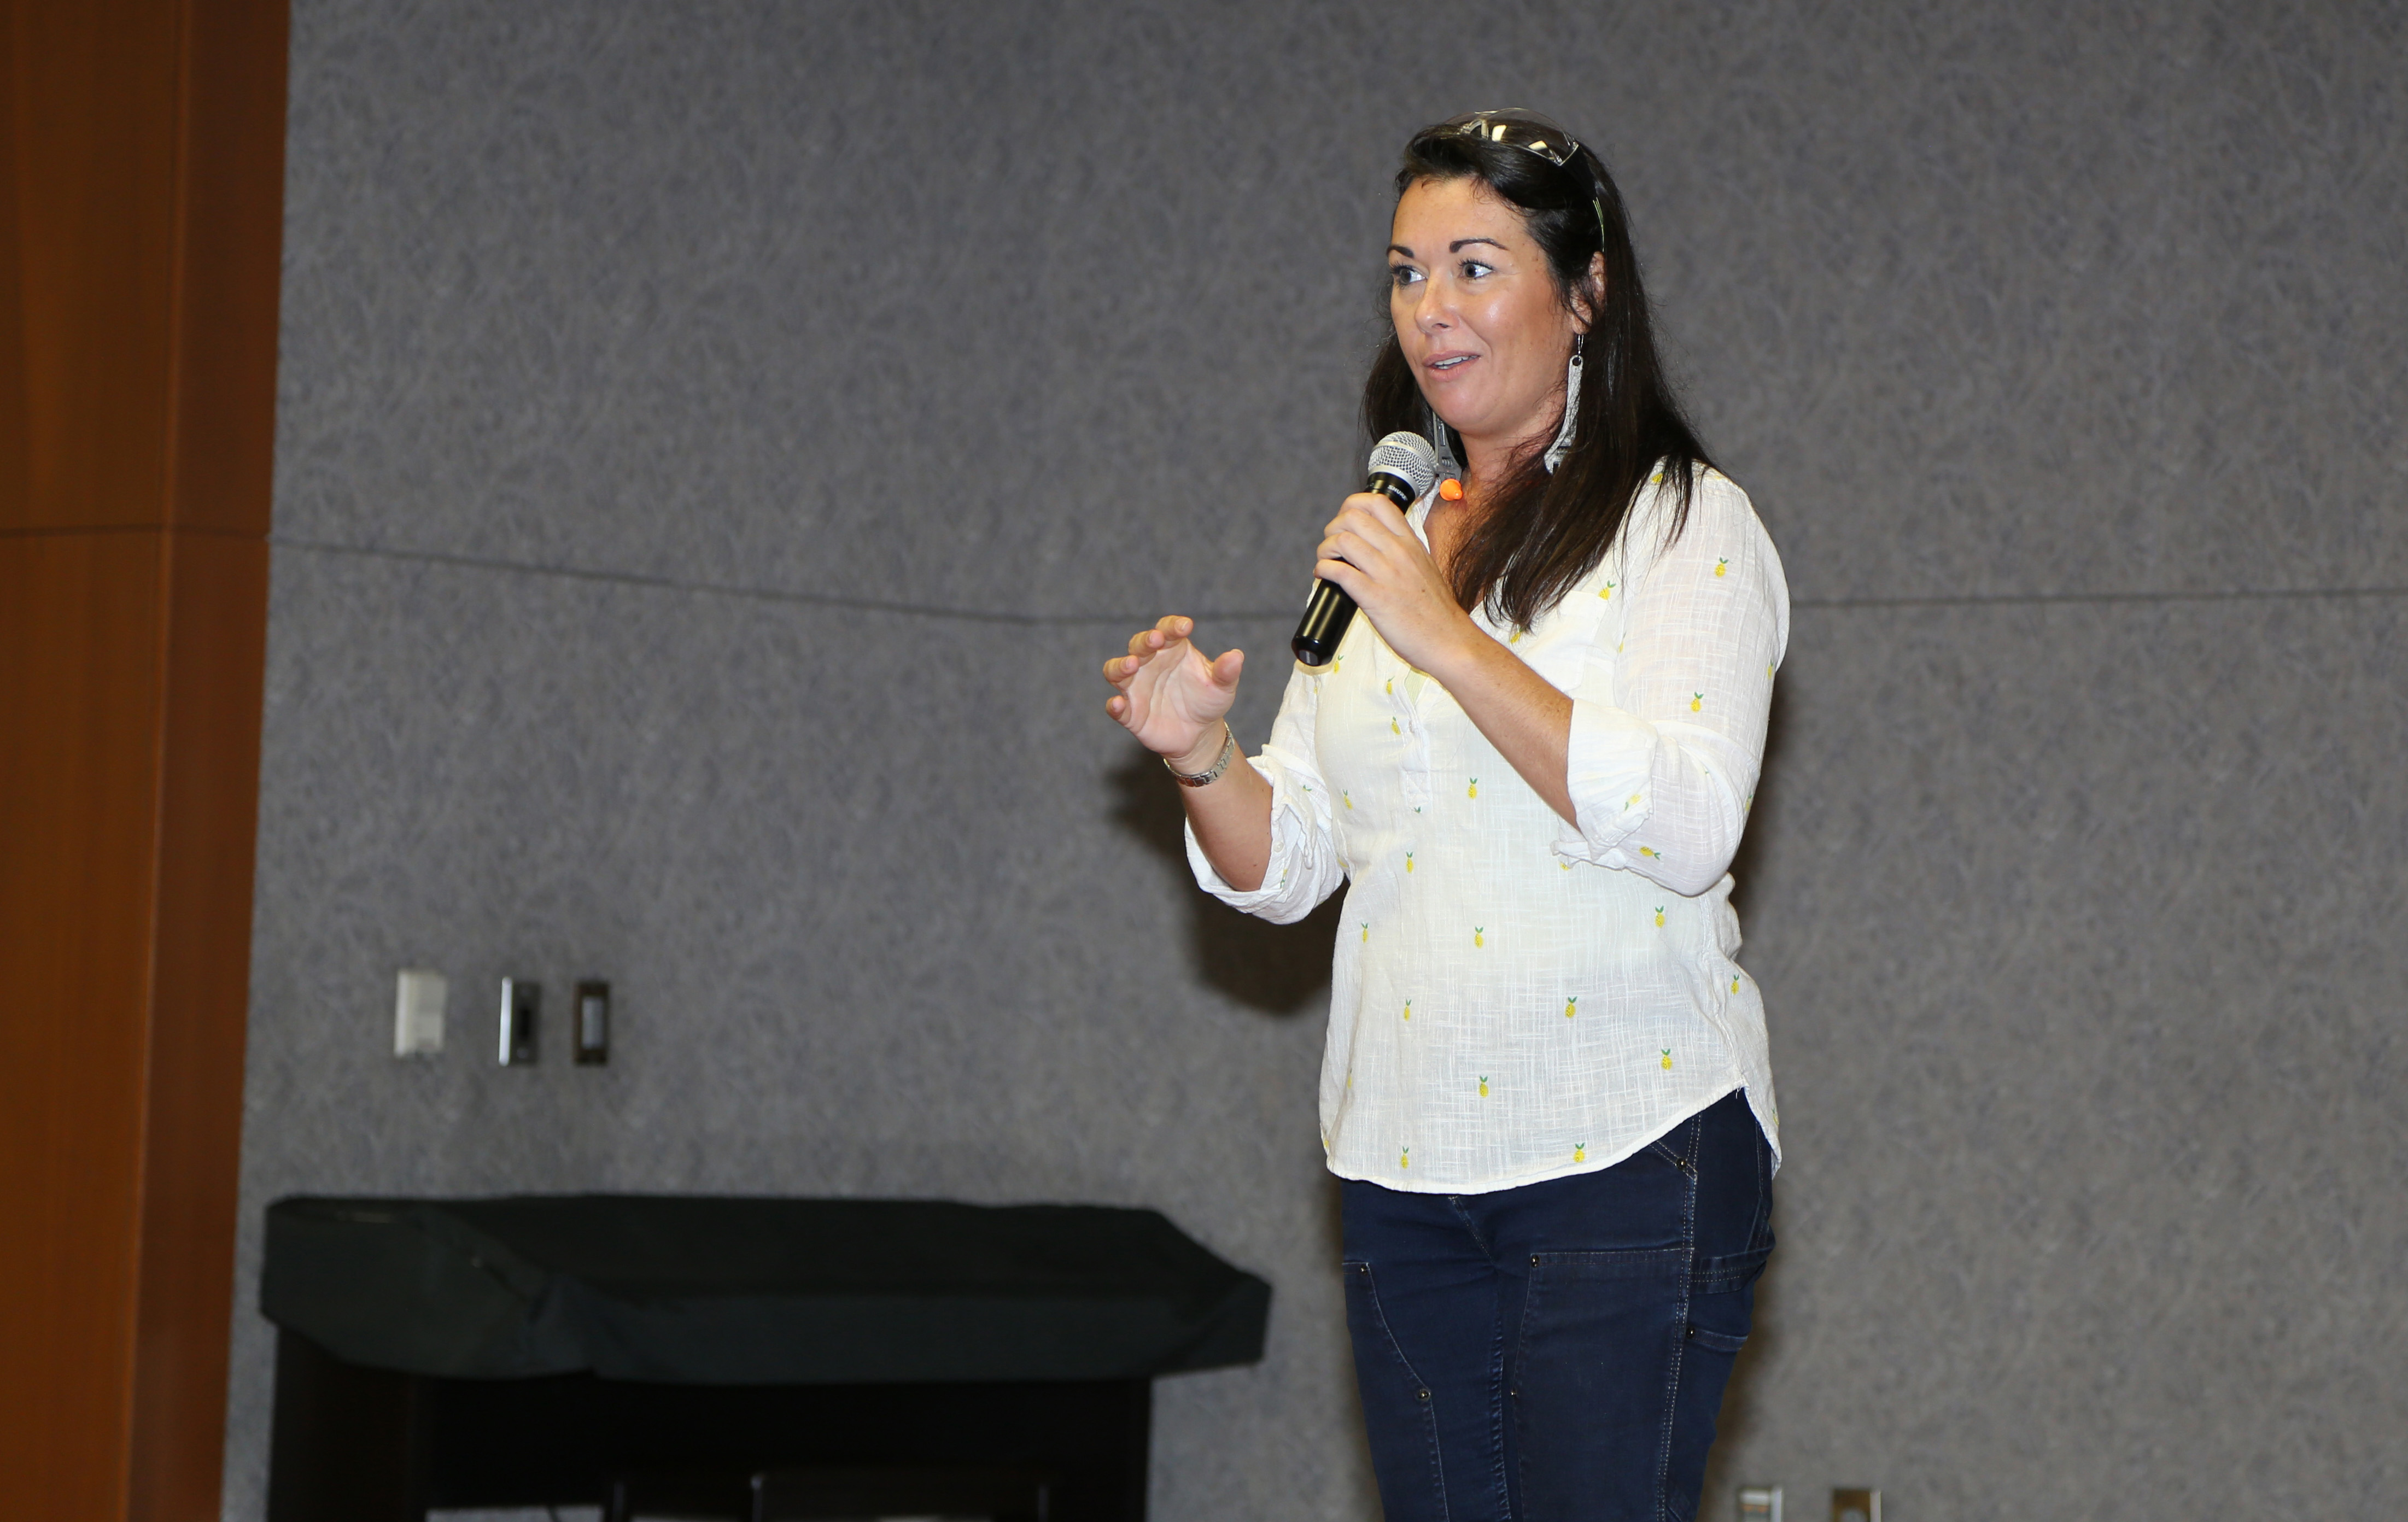 Kayleen McCabe, host of the cable television program “Rescue Renovation,” was the featured guest speaker for Industrial Career Day. McCabe gave three presentations to student groups throughout the day and also hosted an afternoon session for business and industry partners and members of the community.